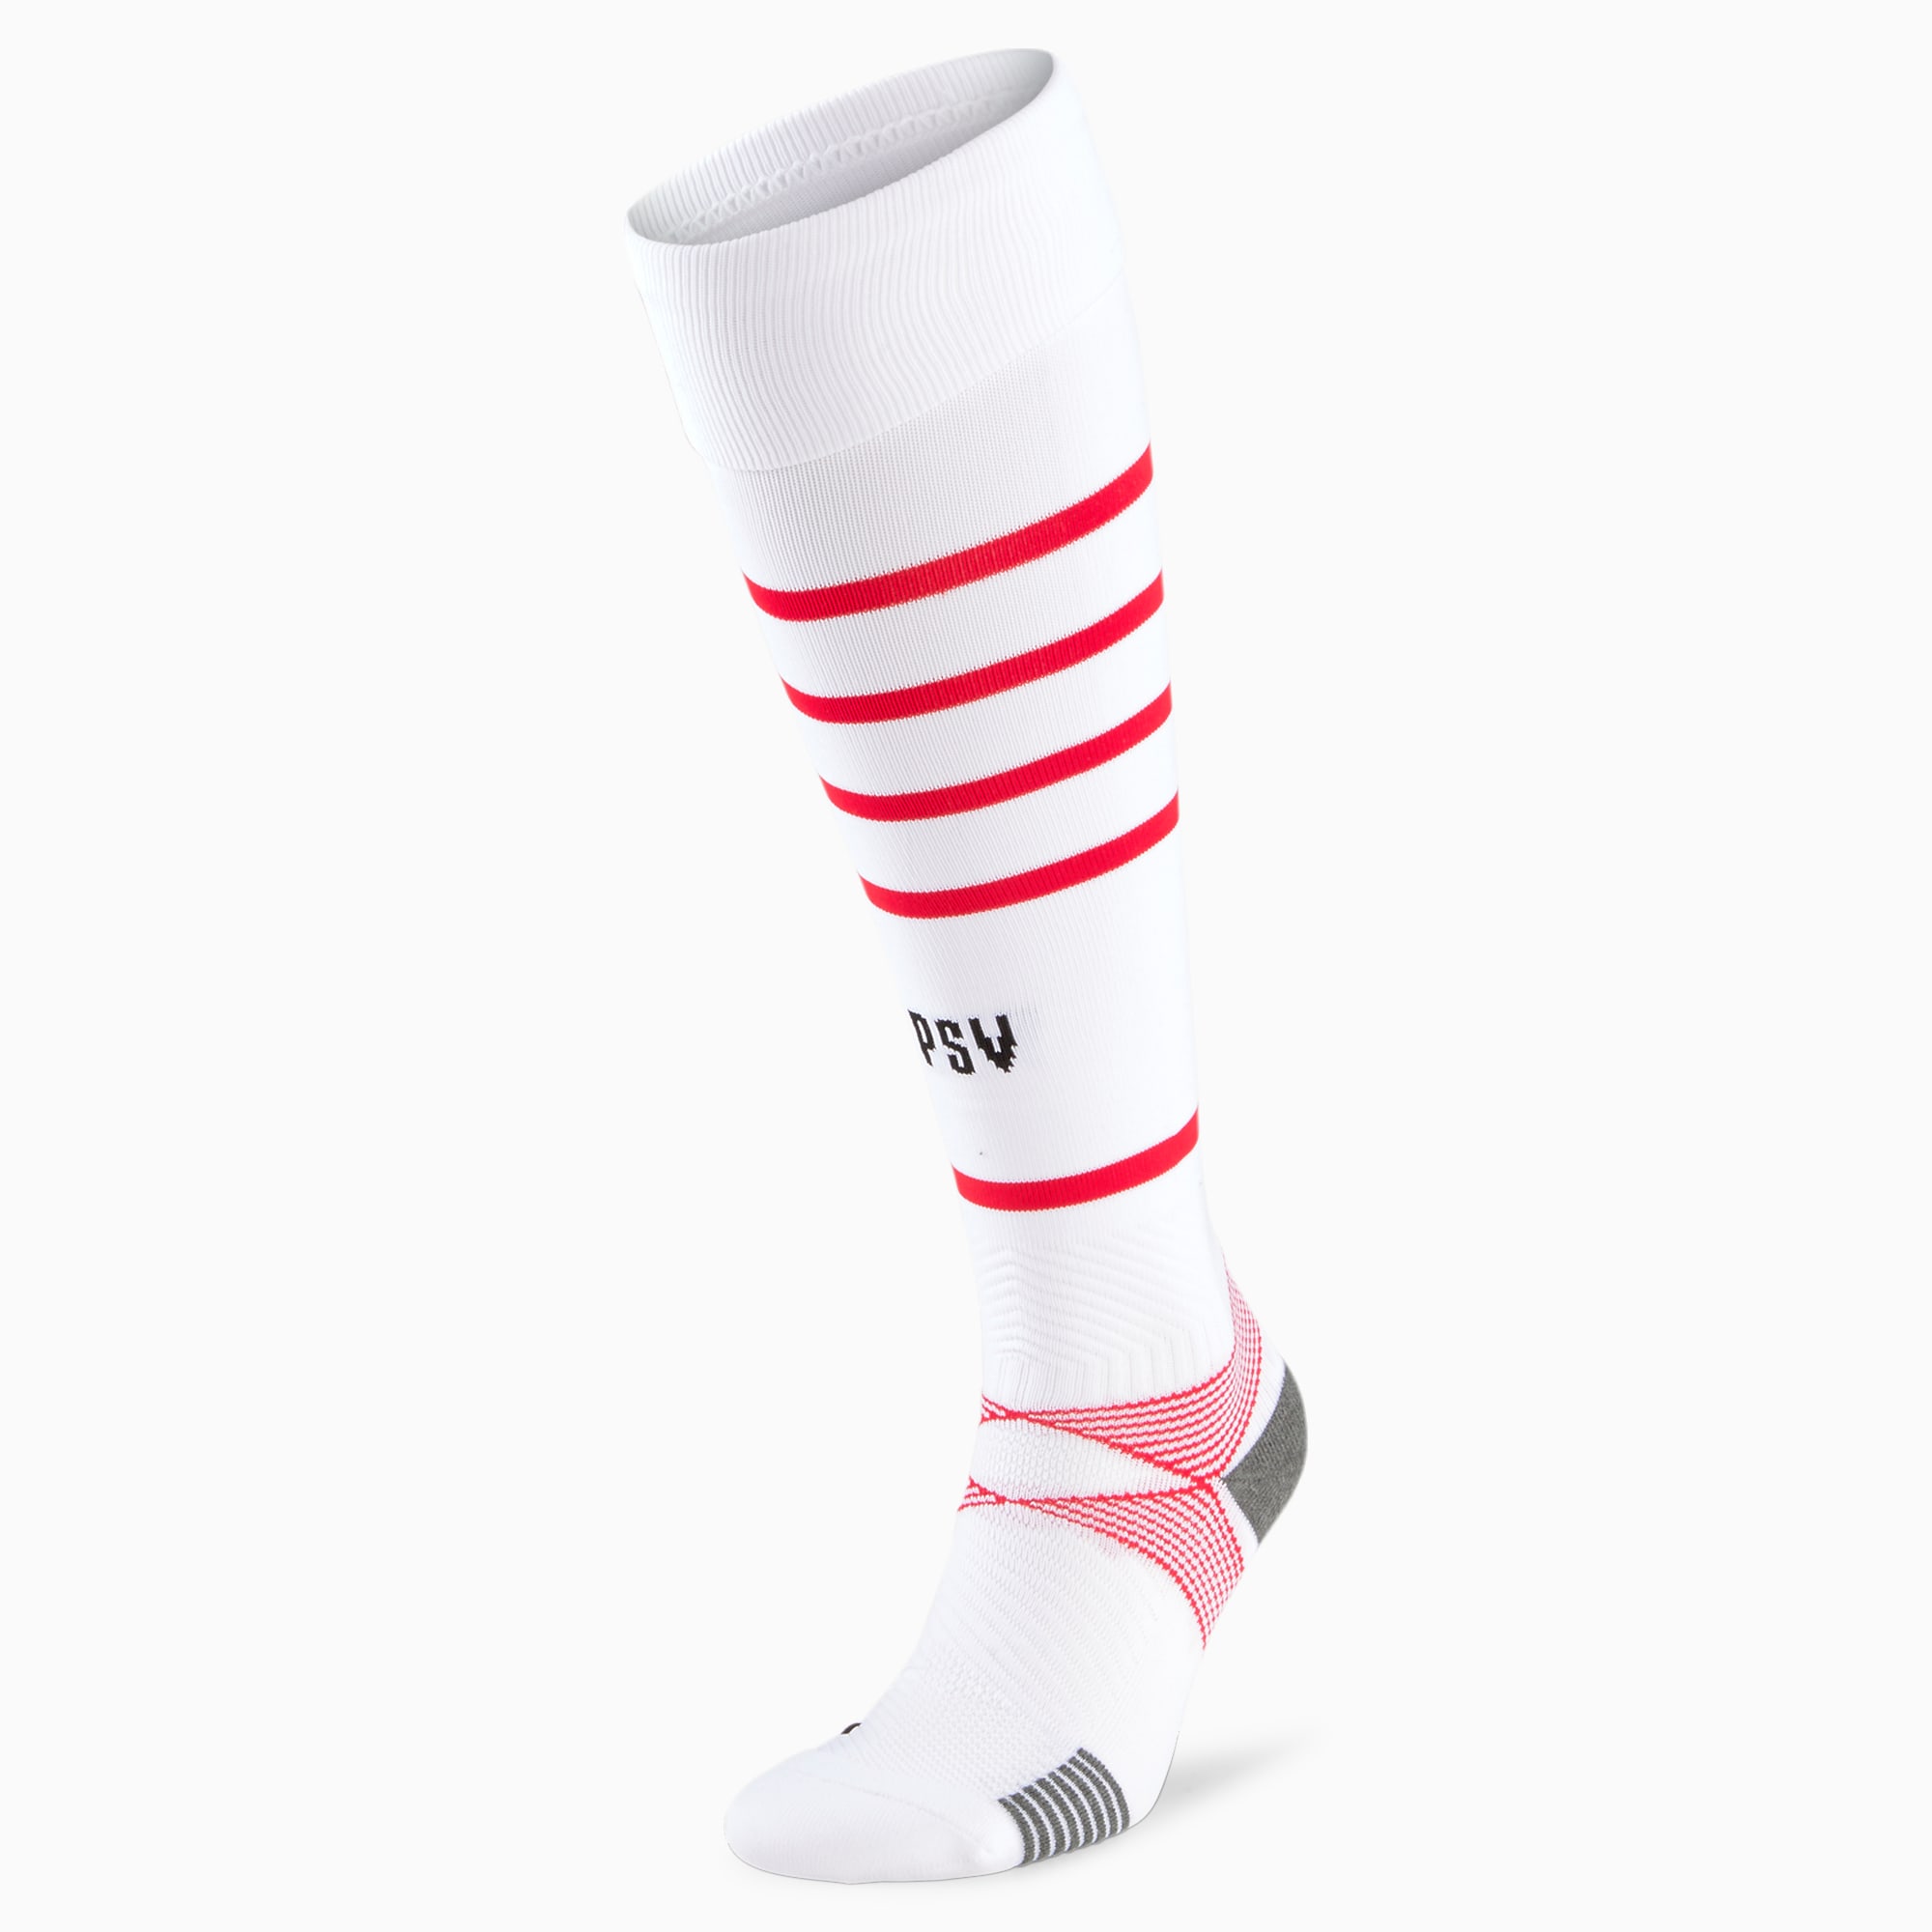 PUMA Chaussettes de football a rayures horizontales PSV Eindhoven Replica Homme 21/22, Blanc/Rouge, Taille 39-42, Vetements